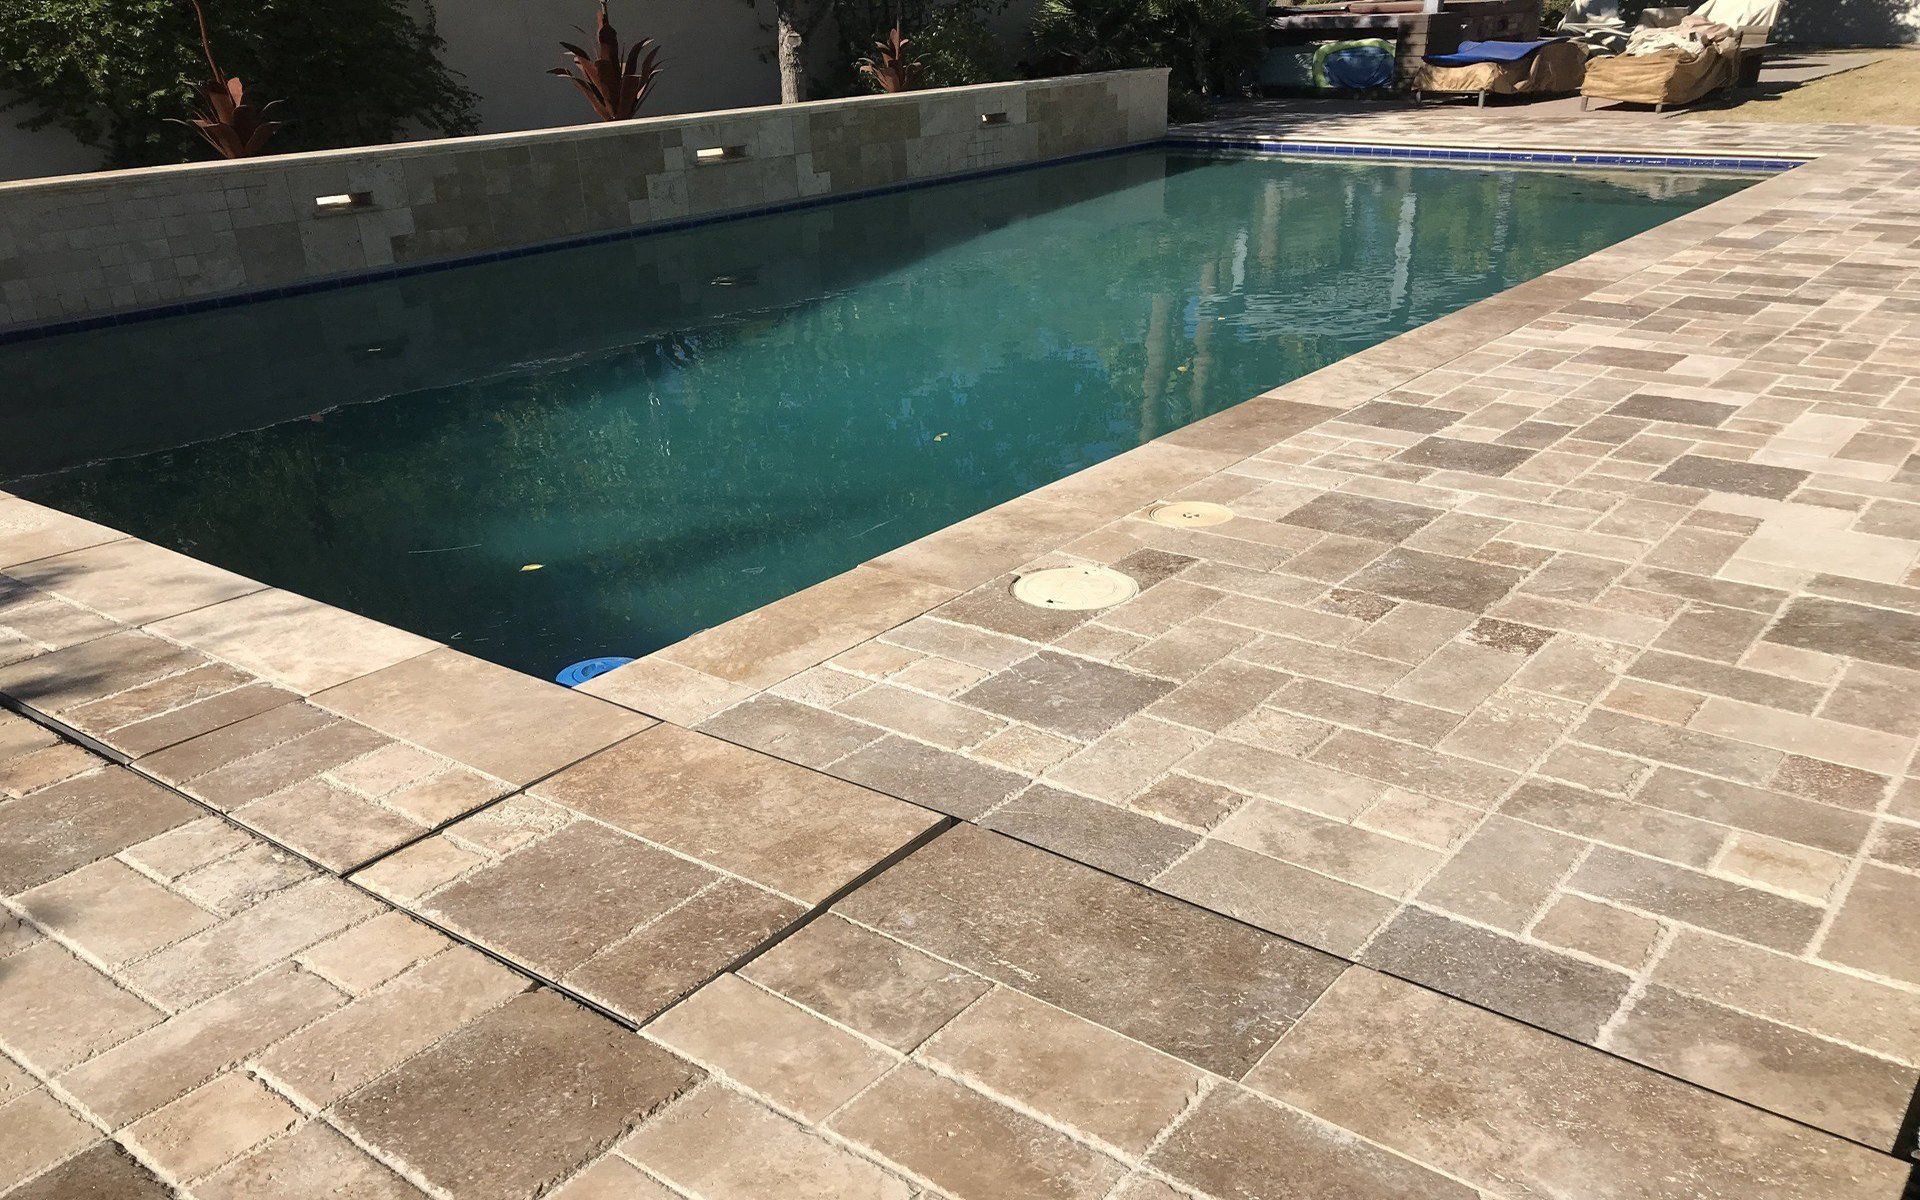 Cleaning Travertine Pavers, How To Seal Travertine Pool Tiles